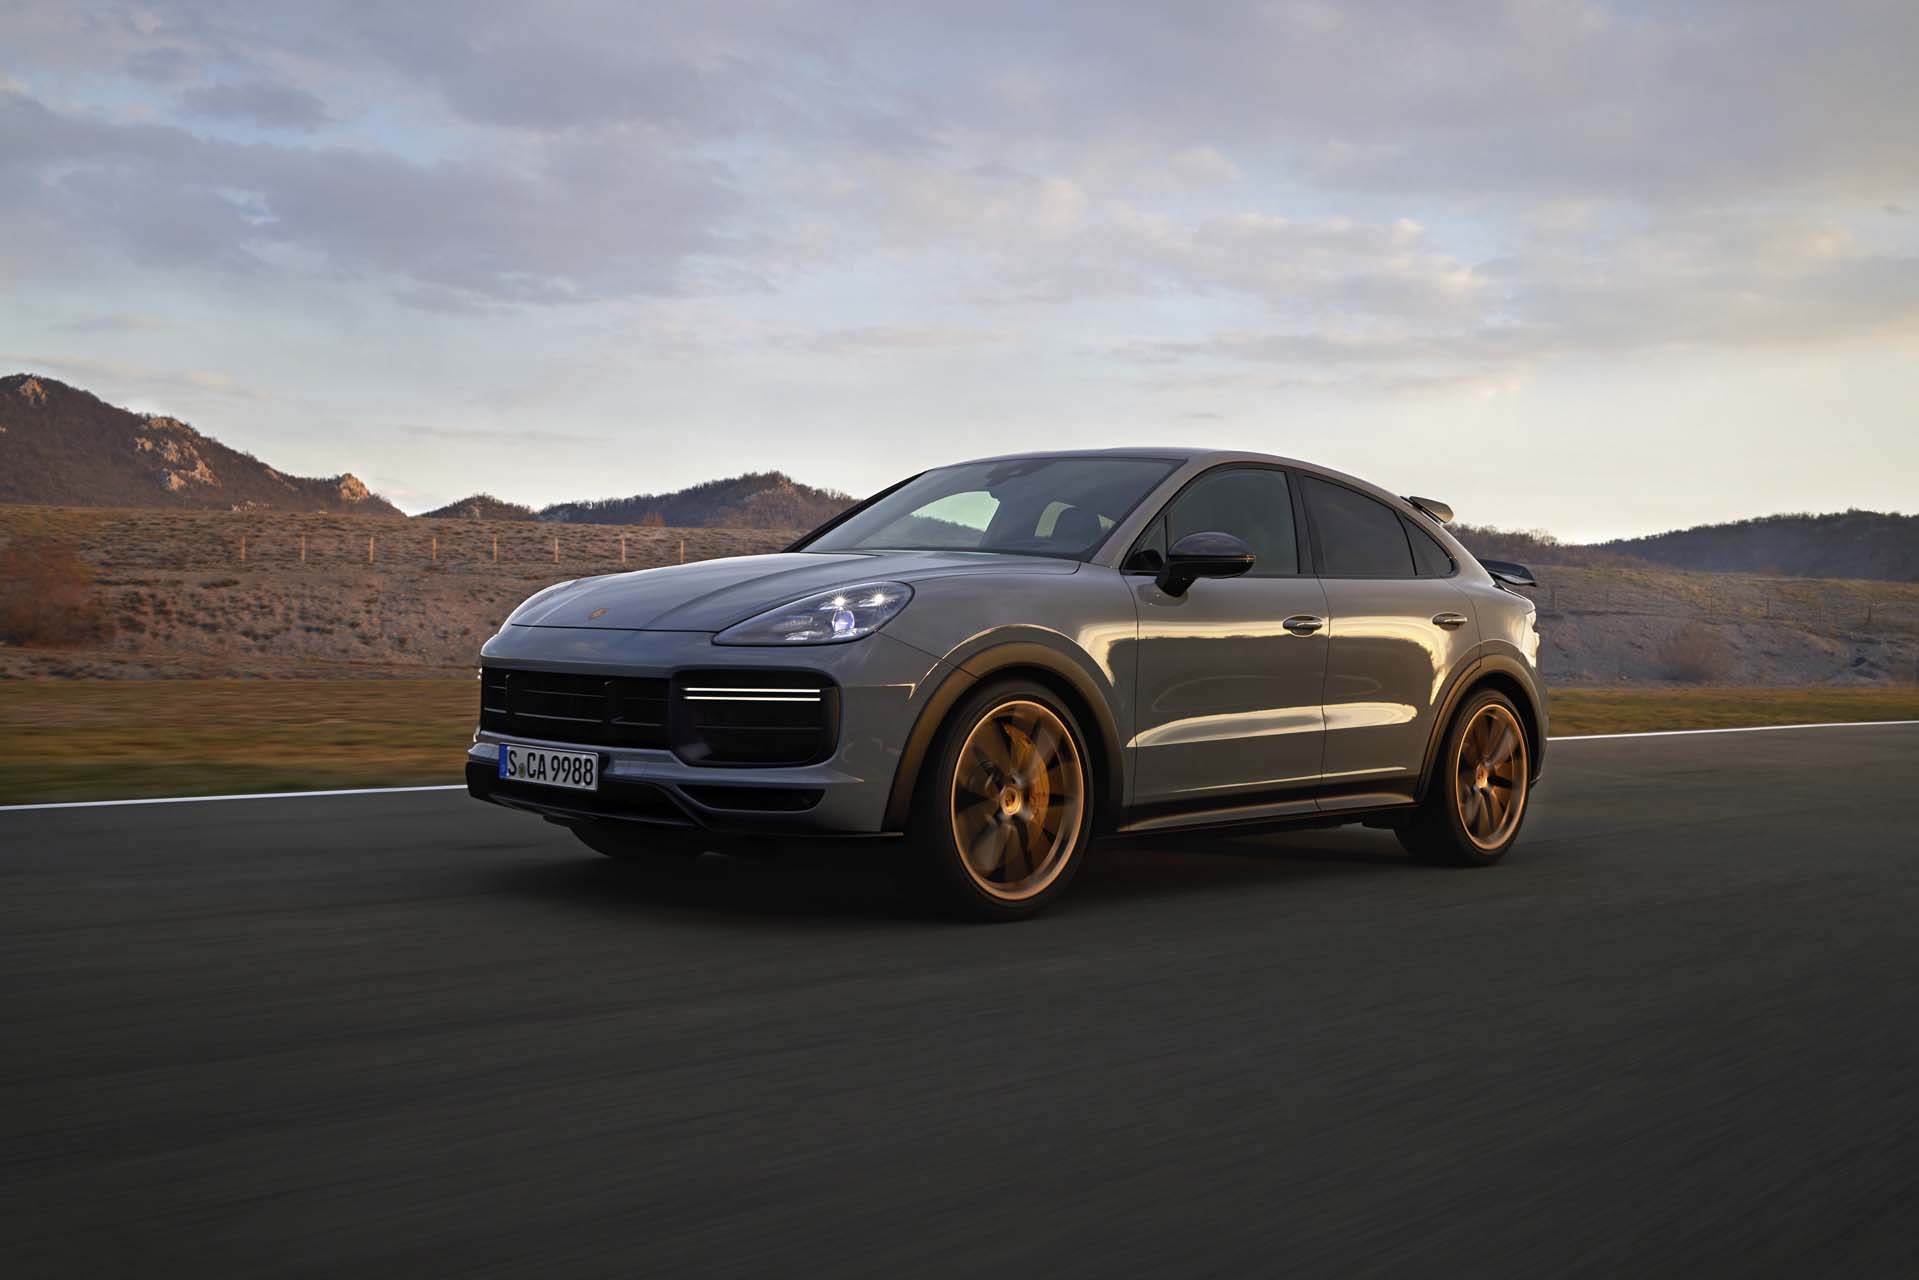 Preview: 2022 Porsche Cayenne Turbo GT is your prime track-focused crossover Auto Recent